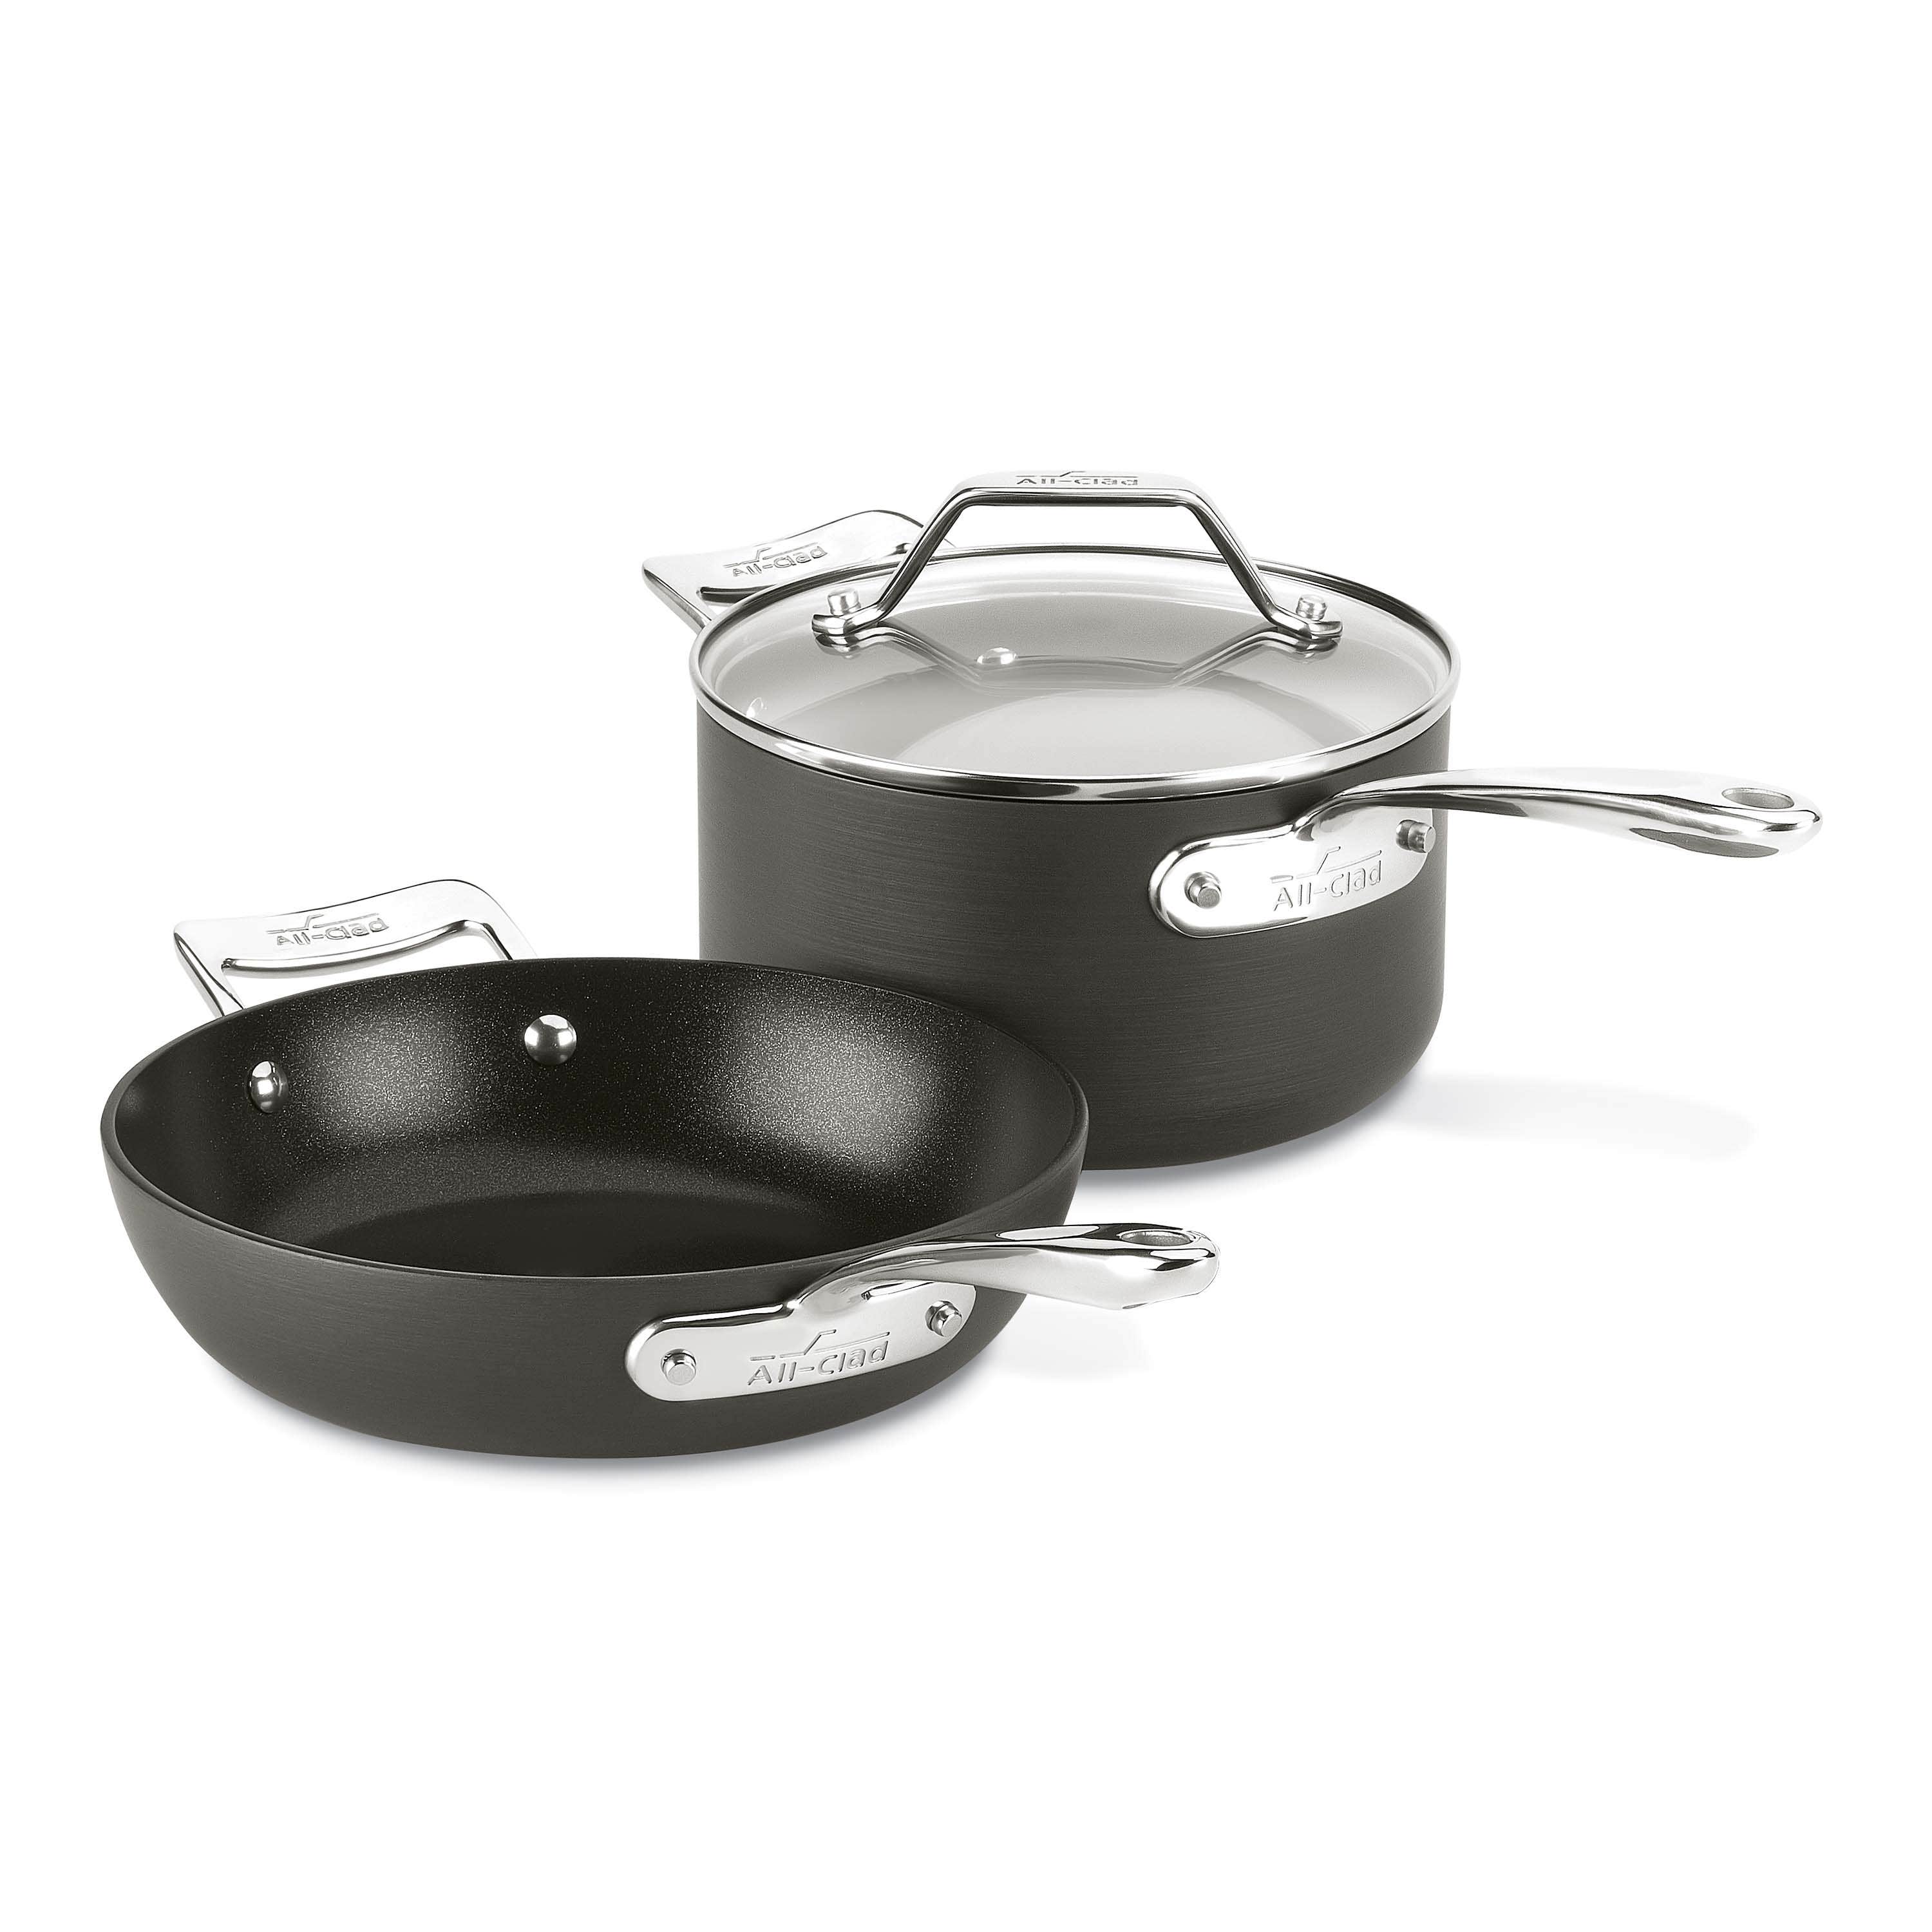 FOX Cookware Large Cookset 4Pieces